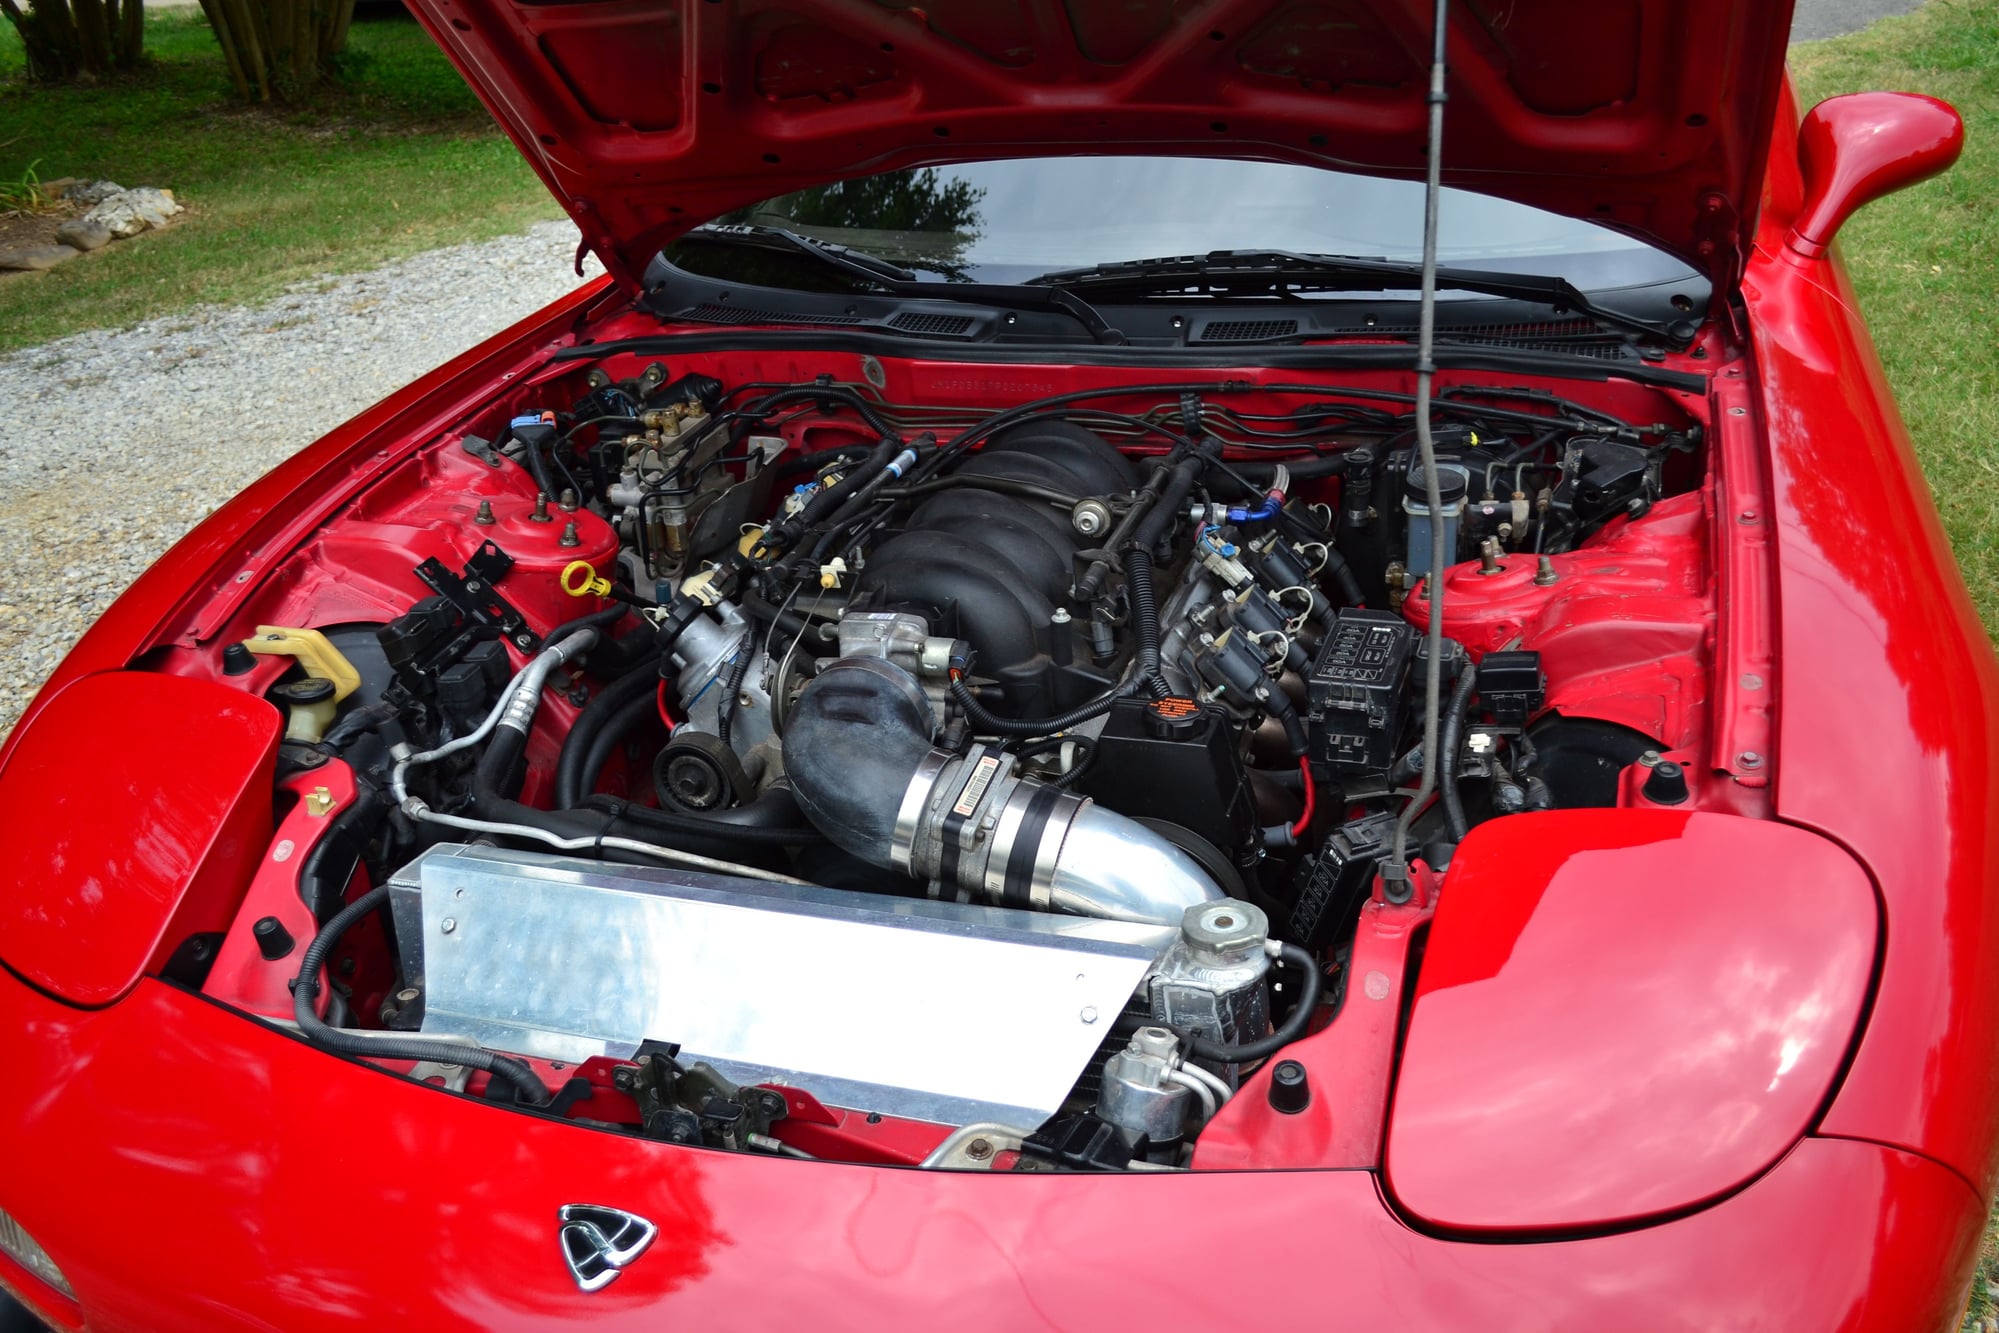 1993 Mazda RX-7 - 93 FD with LS1/T-56 - Used - VIN JM1FD3317P0207645 - 60,161 Miles - 8 cyl - 2WD - Manual - Coupe - Red - Knoxville, TN 37909, United States